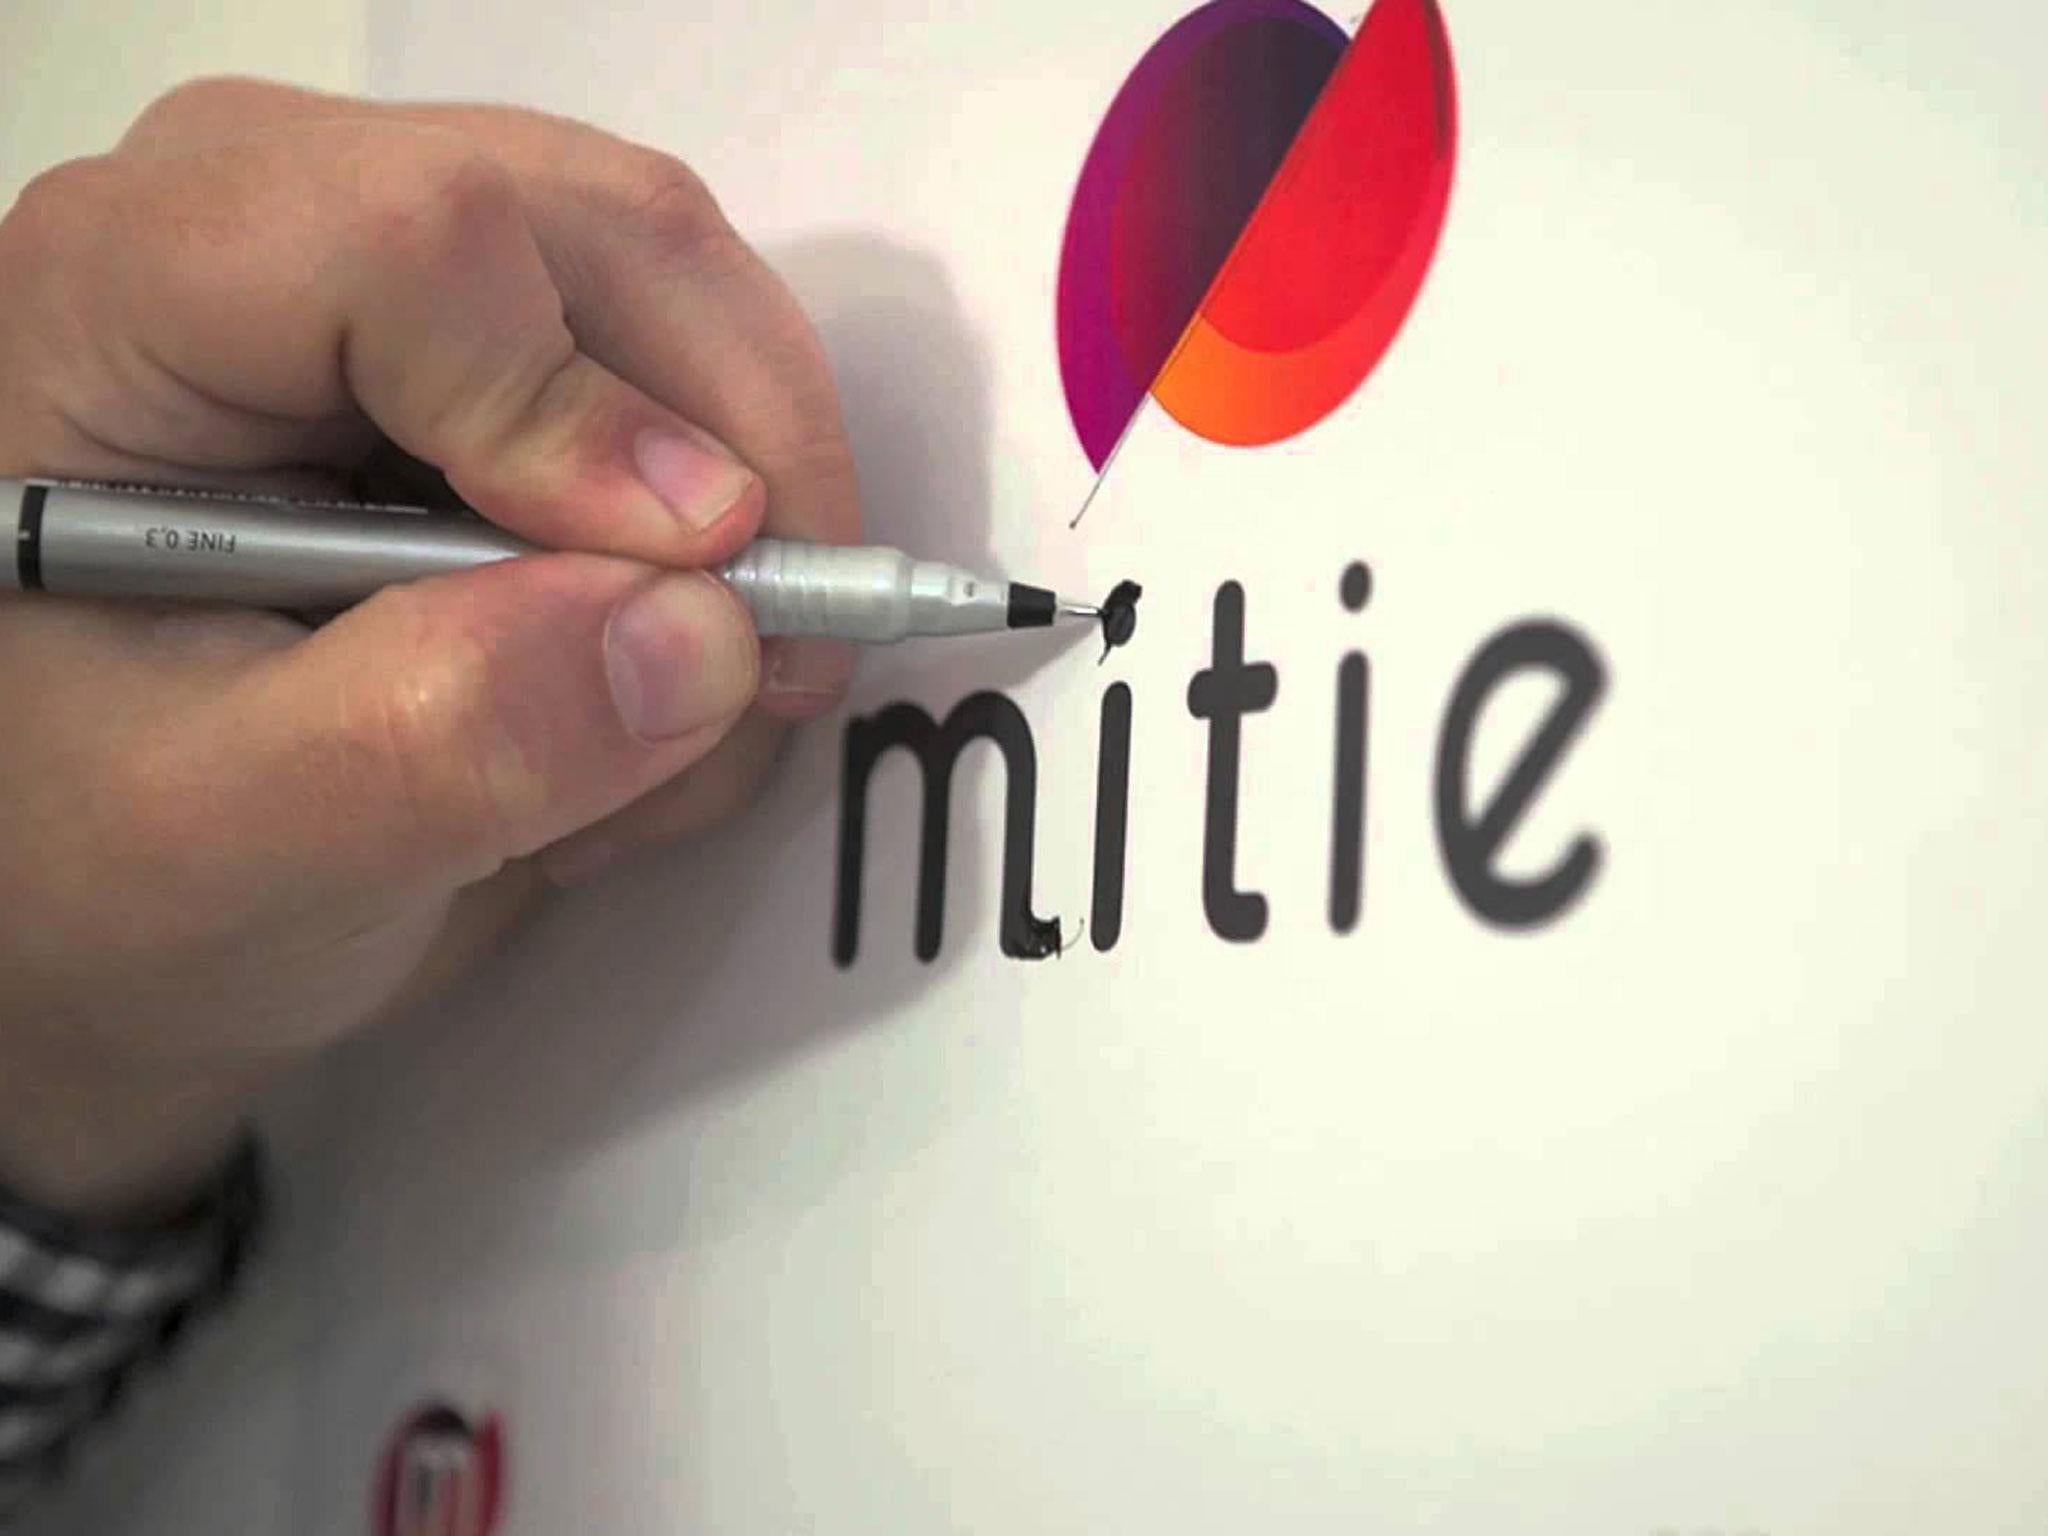 Mitie had not adequately factored in the impact of the increased minimum wage, analysts say